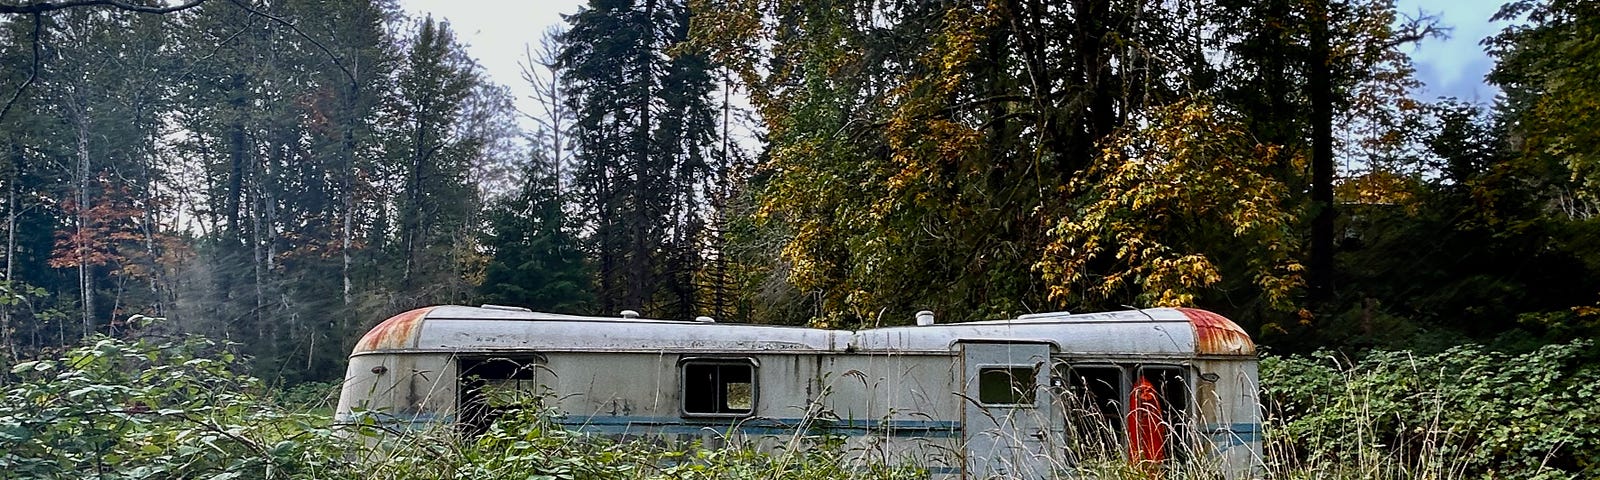 A photo of a trailer in a yard. The trailer is old and looks uninhabited.